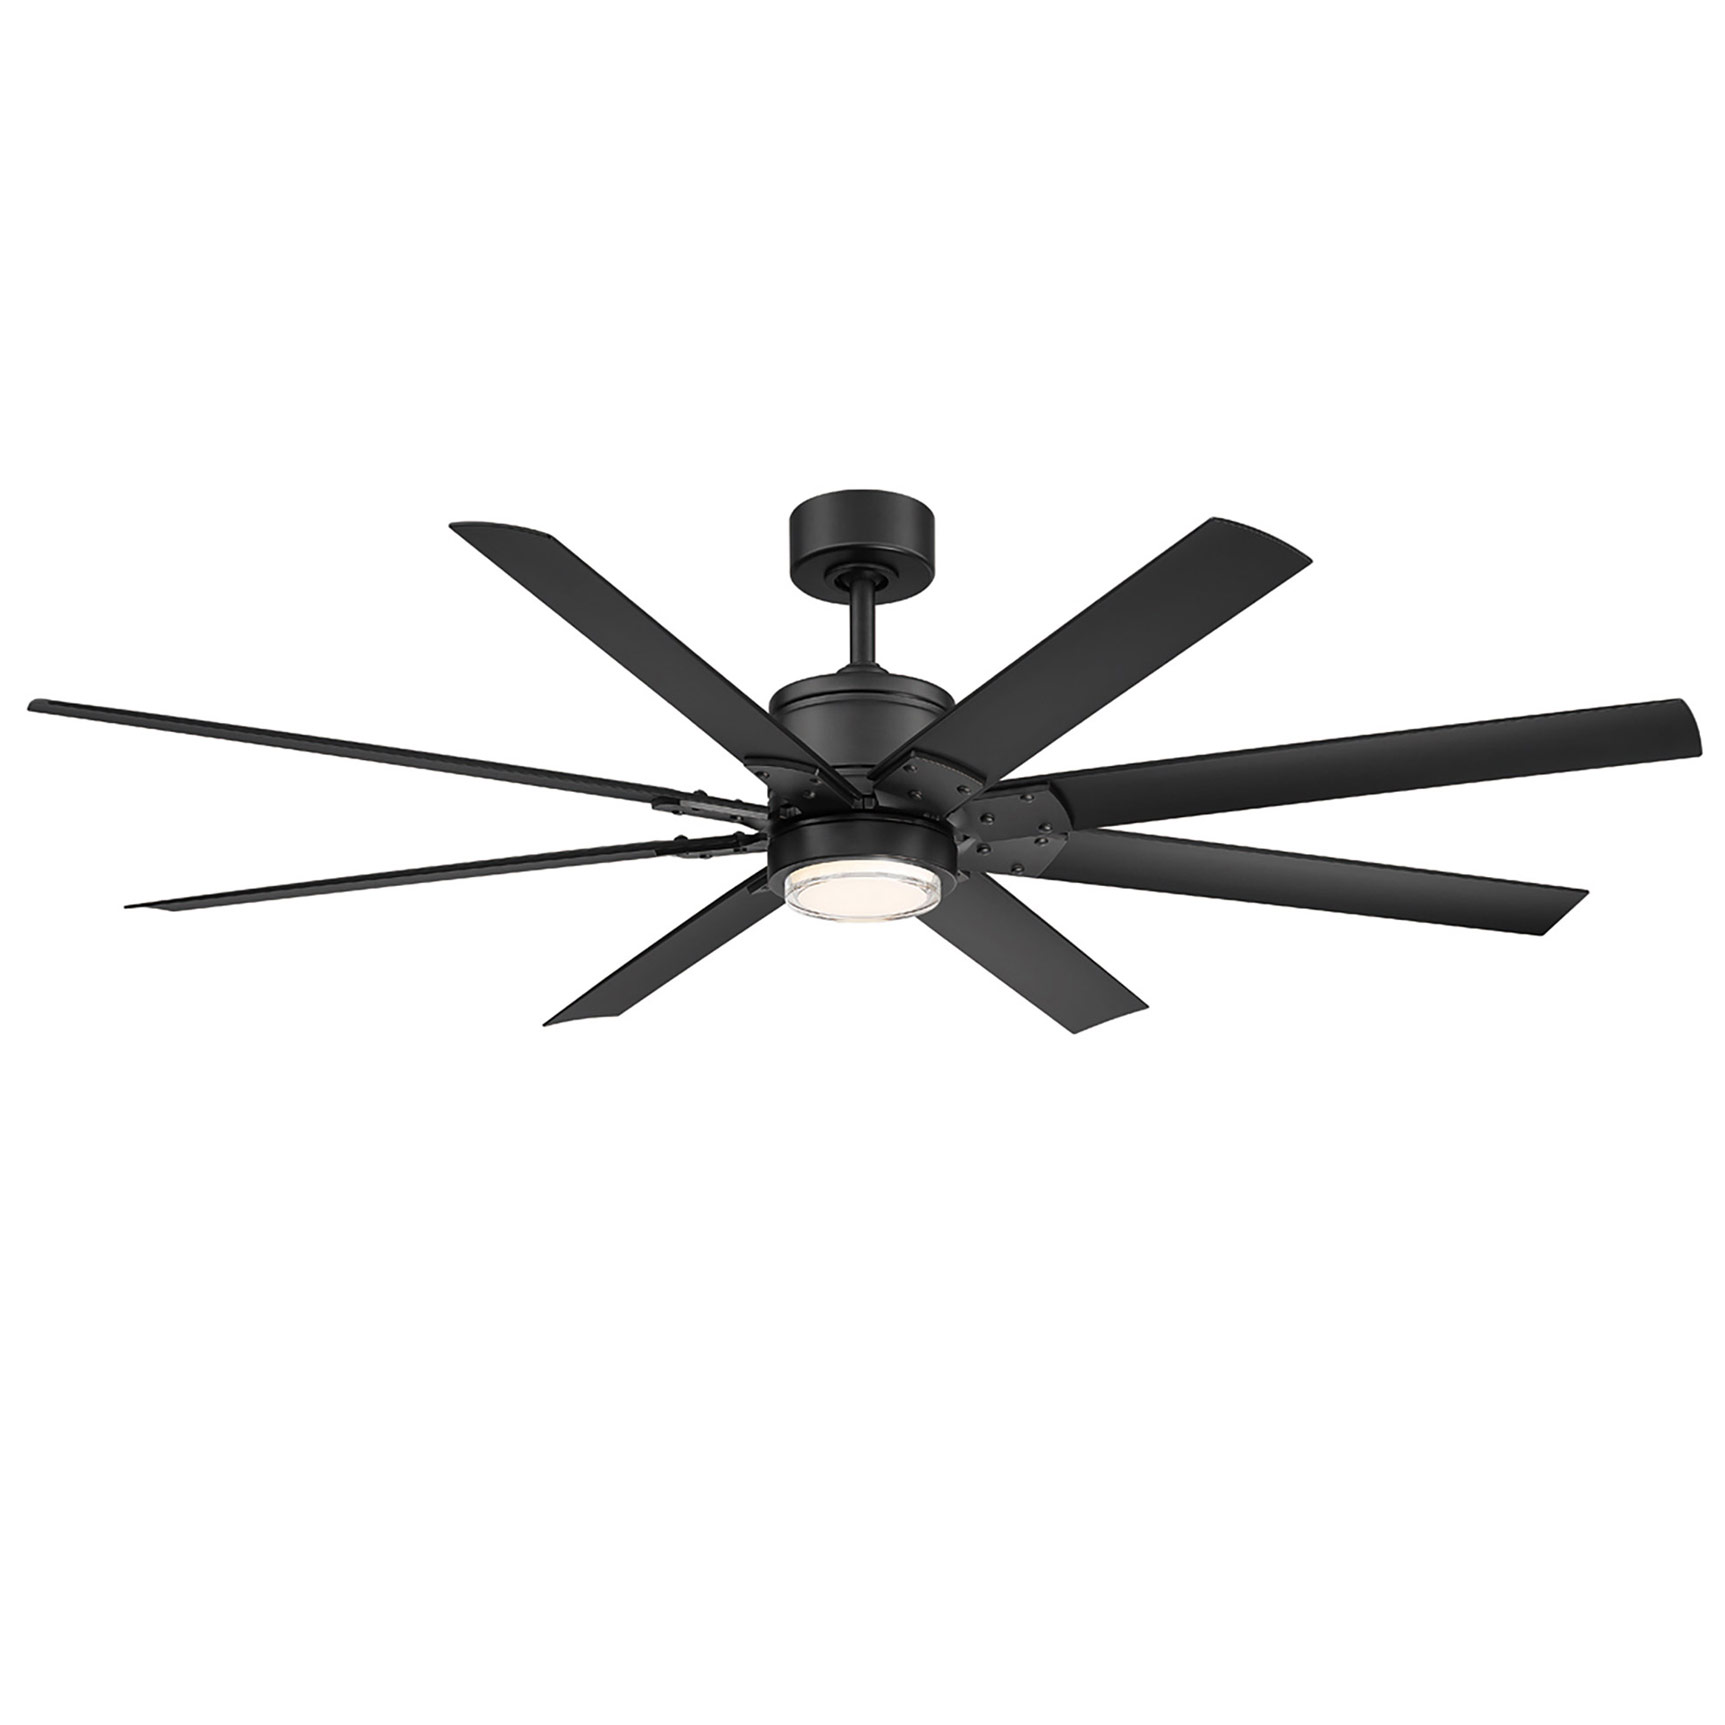 Renegade Ceiling Fan with Light by Modern Forms FR-W2001-52L-MB  MFR918881